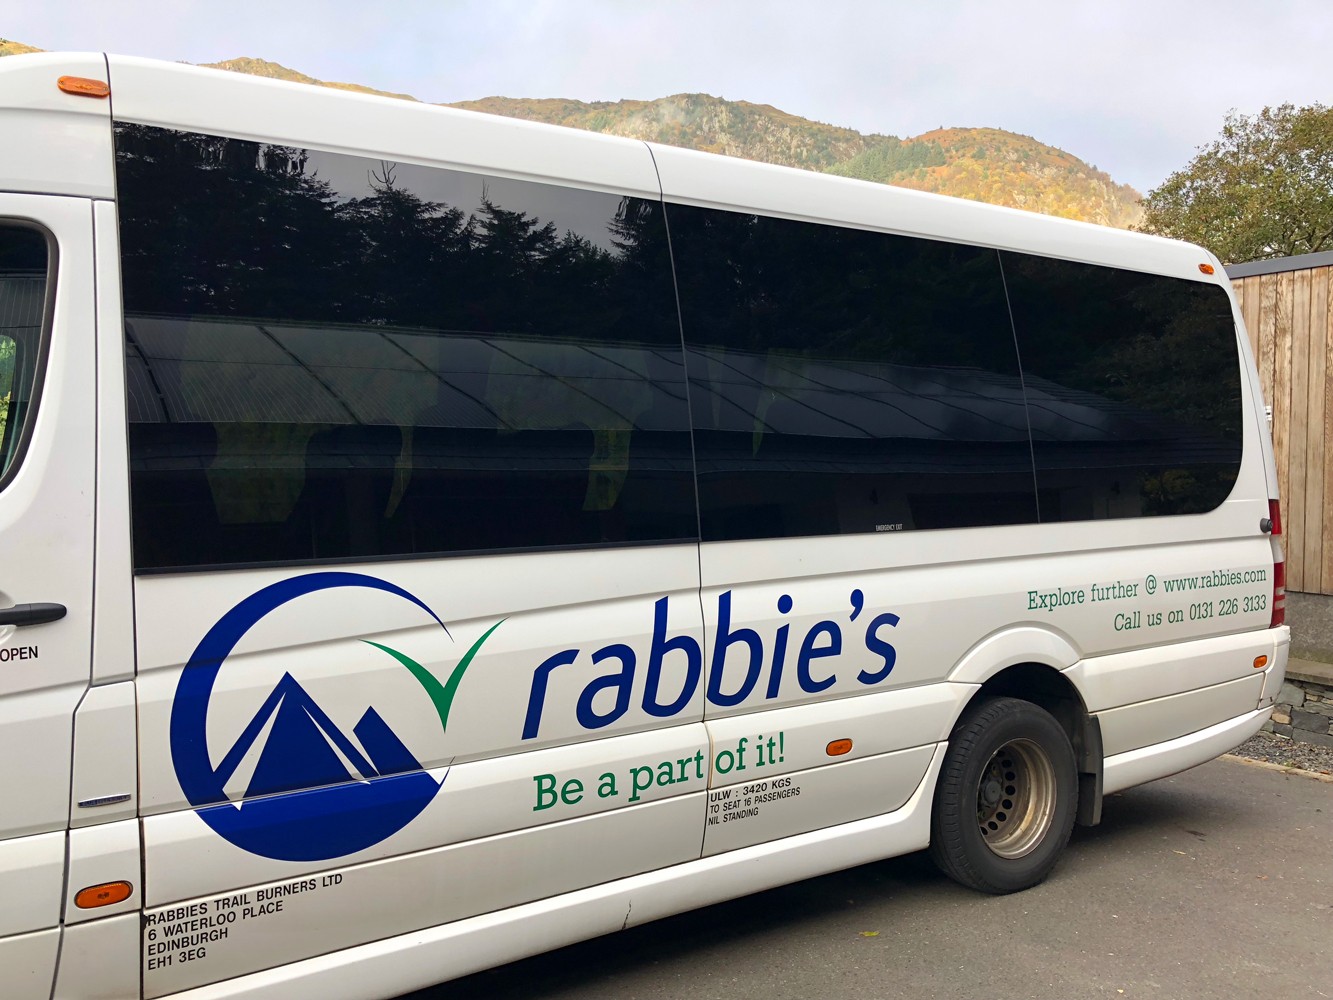 Rabbies Tour of the Scottish Highlands